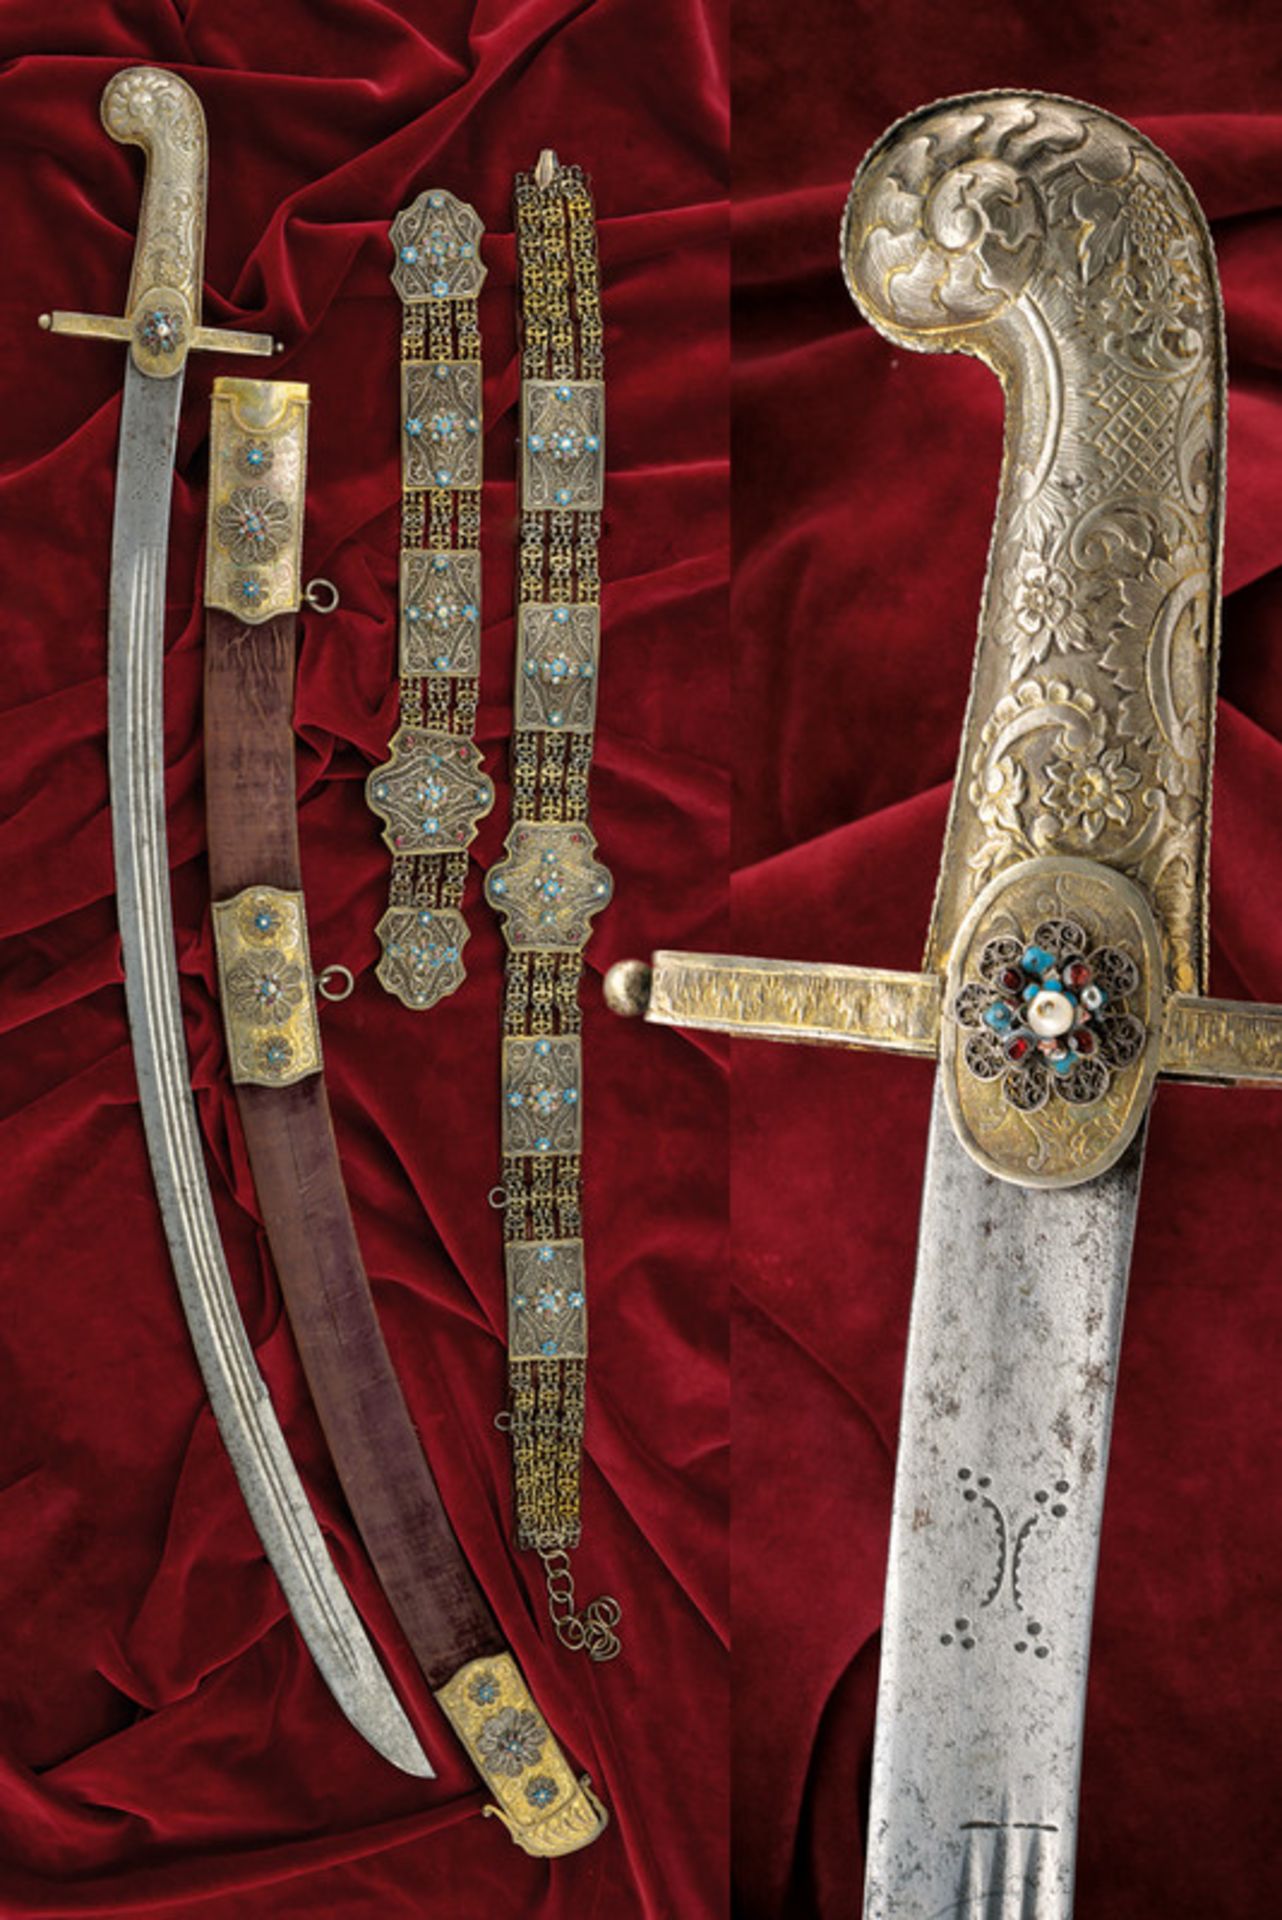 An elegant vermeil mounted Magnate's sabre, with decorated belt dating: circa 1800 provenance: